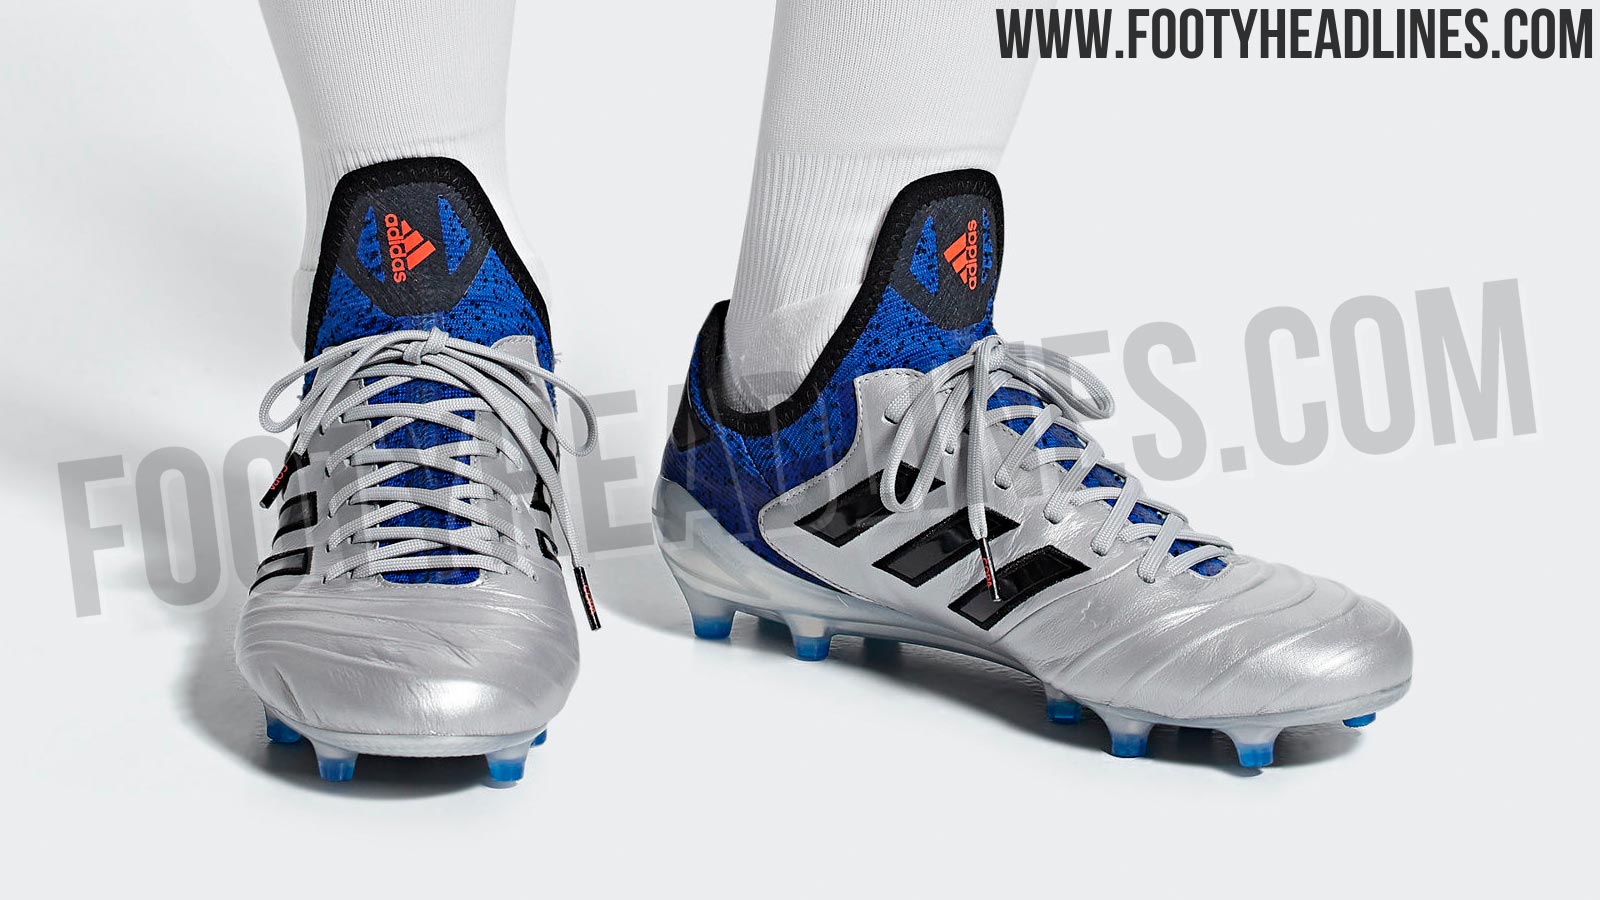 Pure Class: Adidas Copa 'Team Mode' Boots Leaked - Headlines